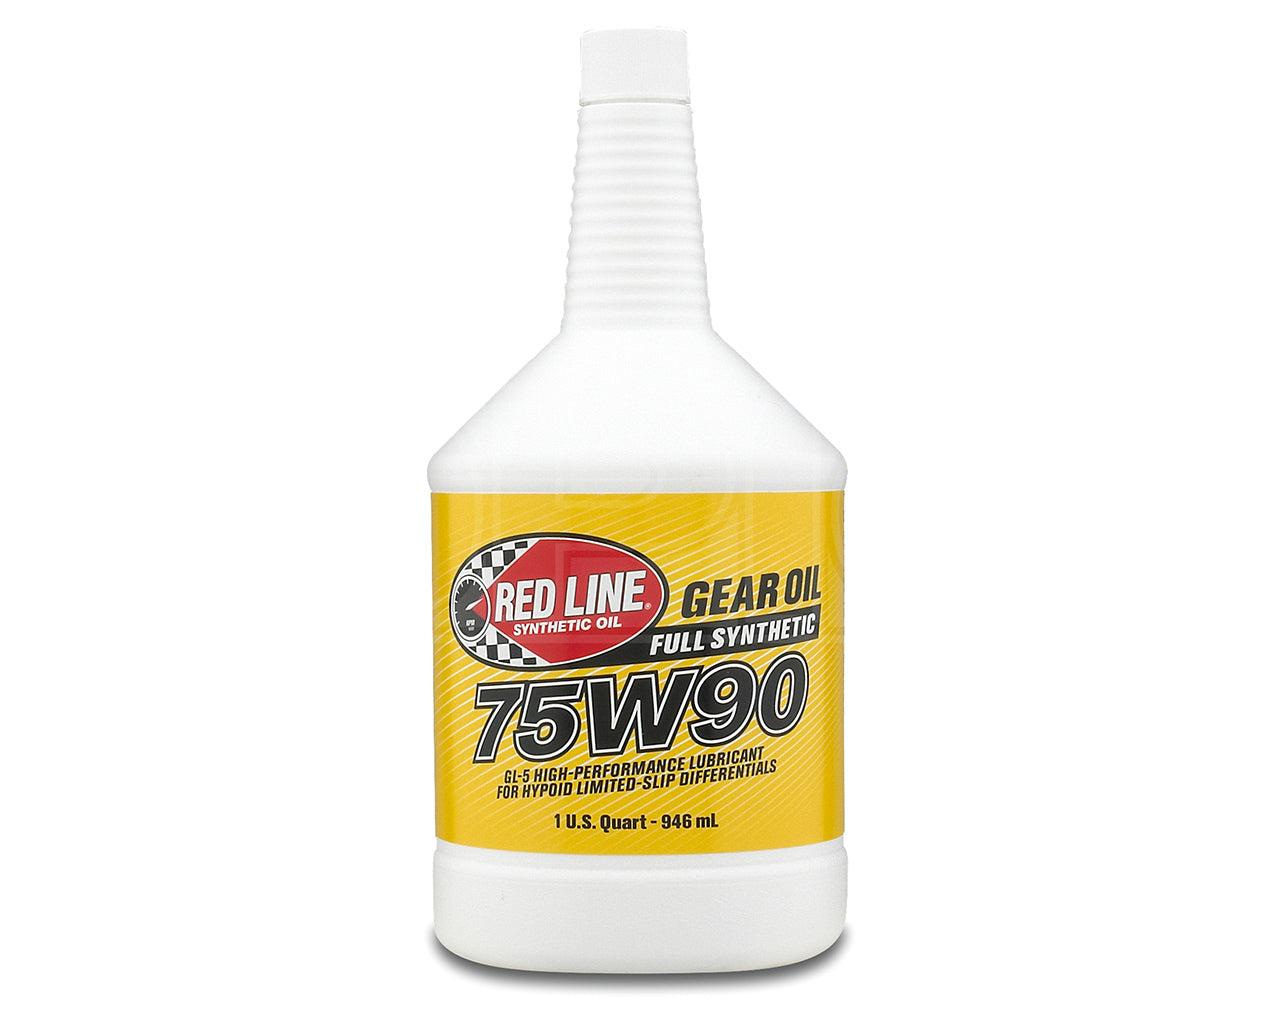 RED LINE Synthetic Gear Oil 75W-90 GL5